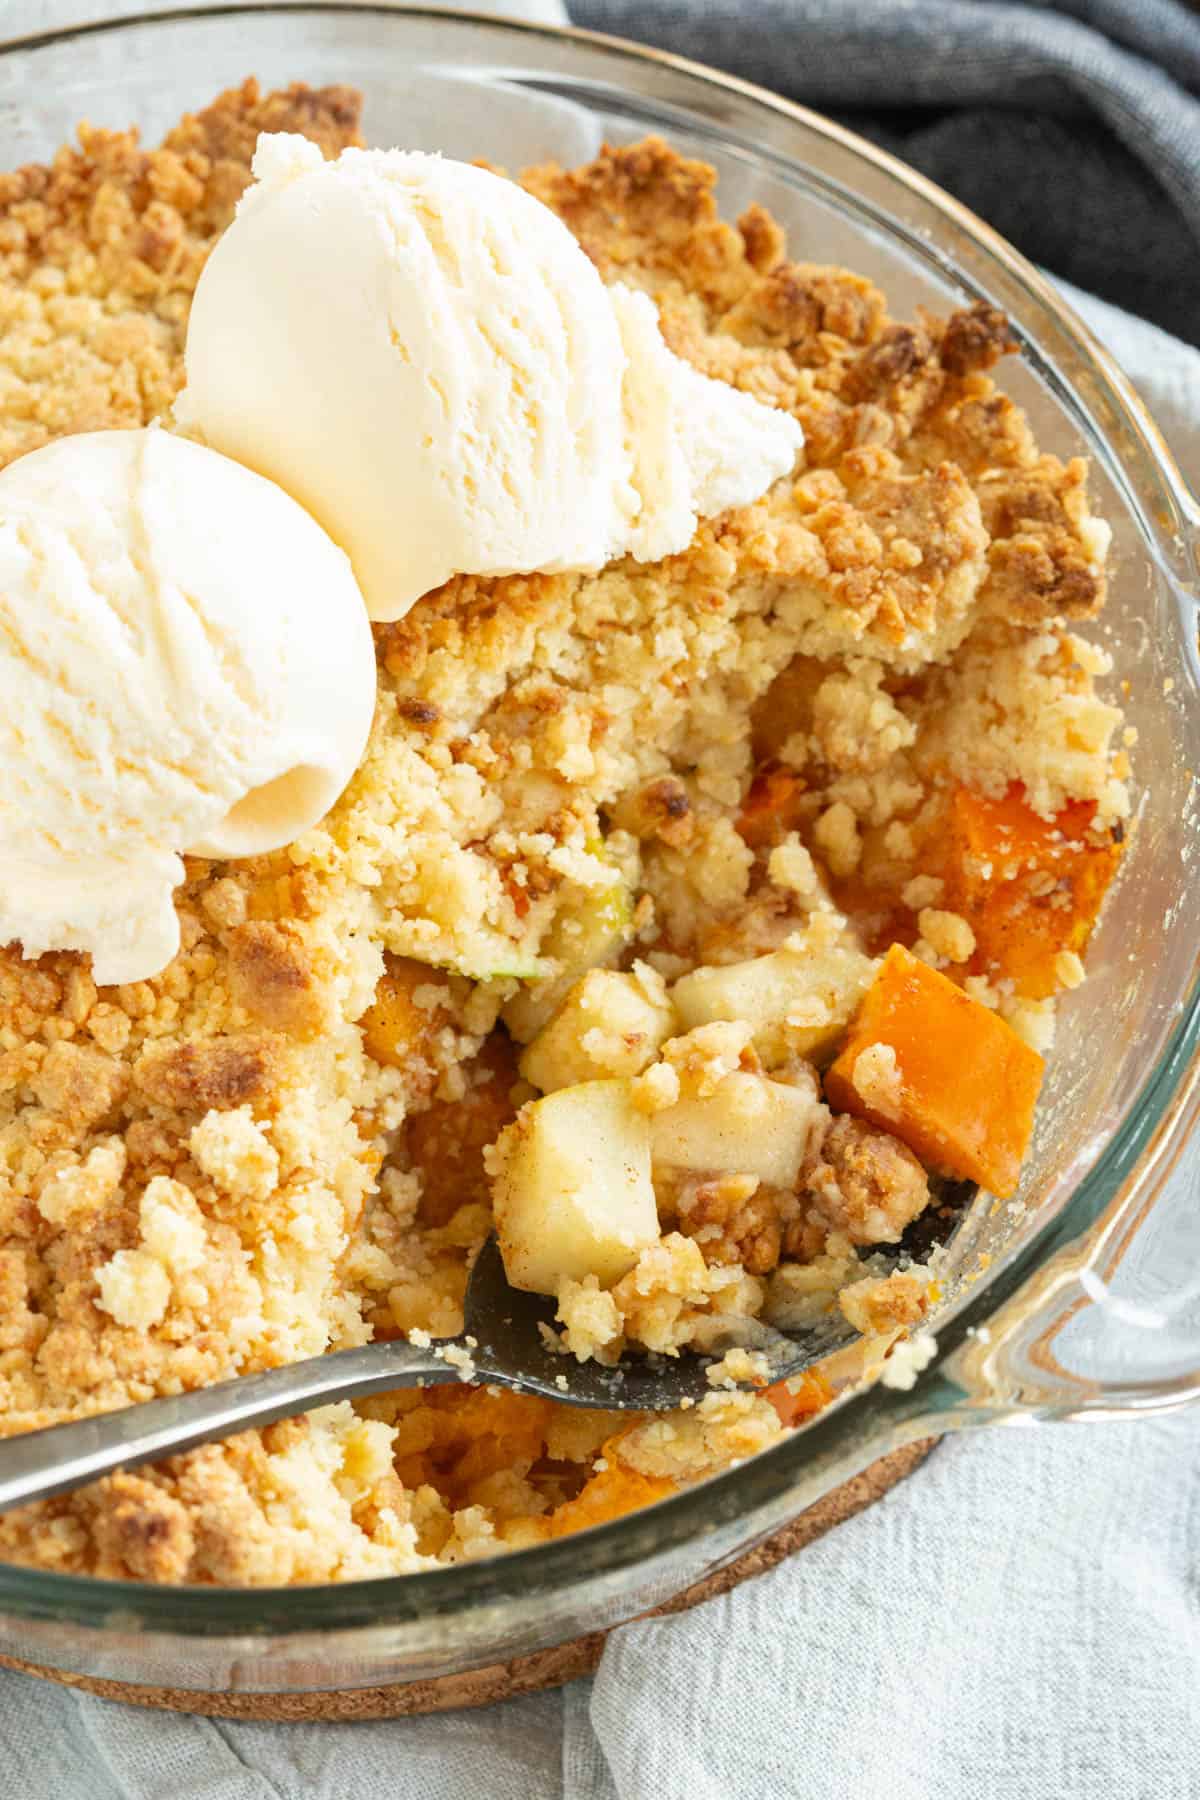 A persimmon crumble topped with vanilla ice-cream.